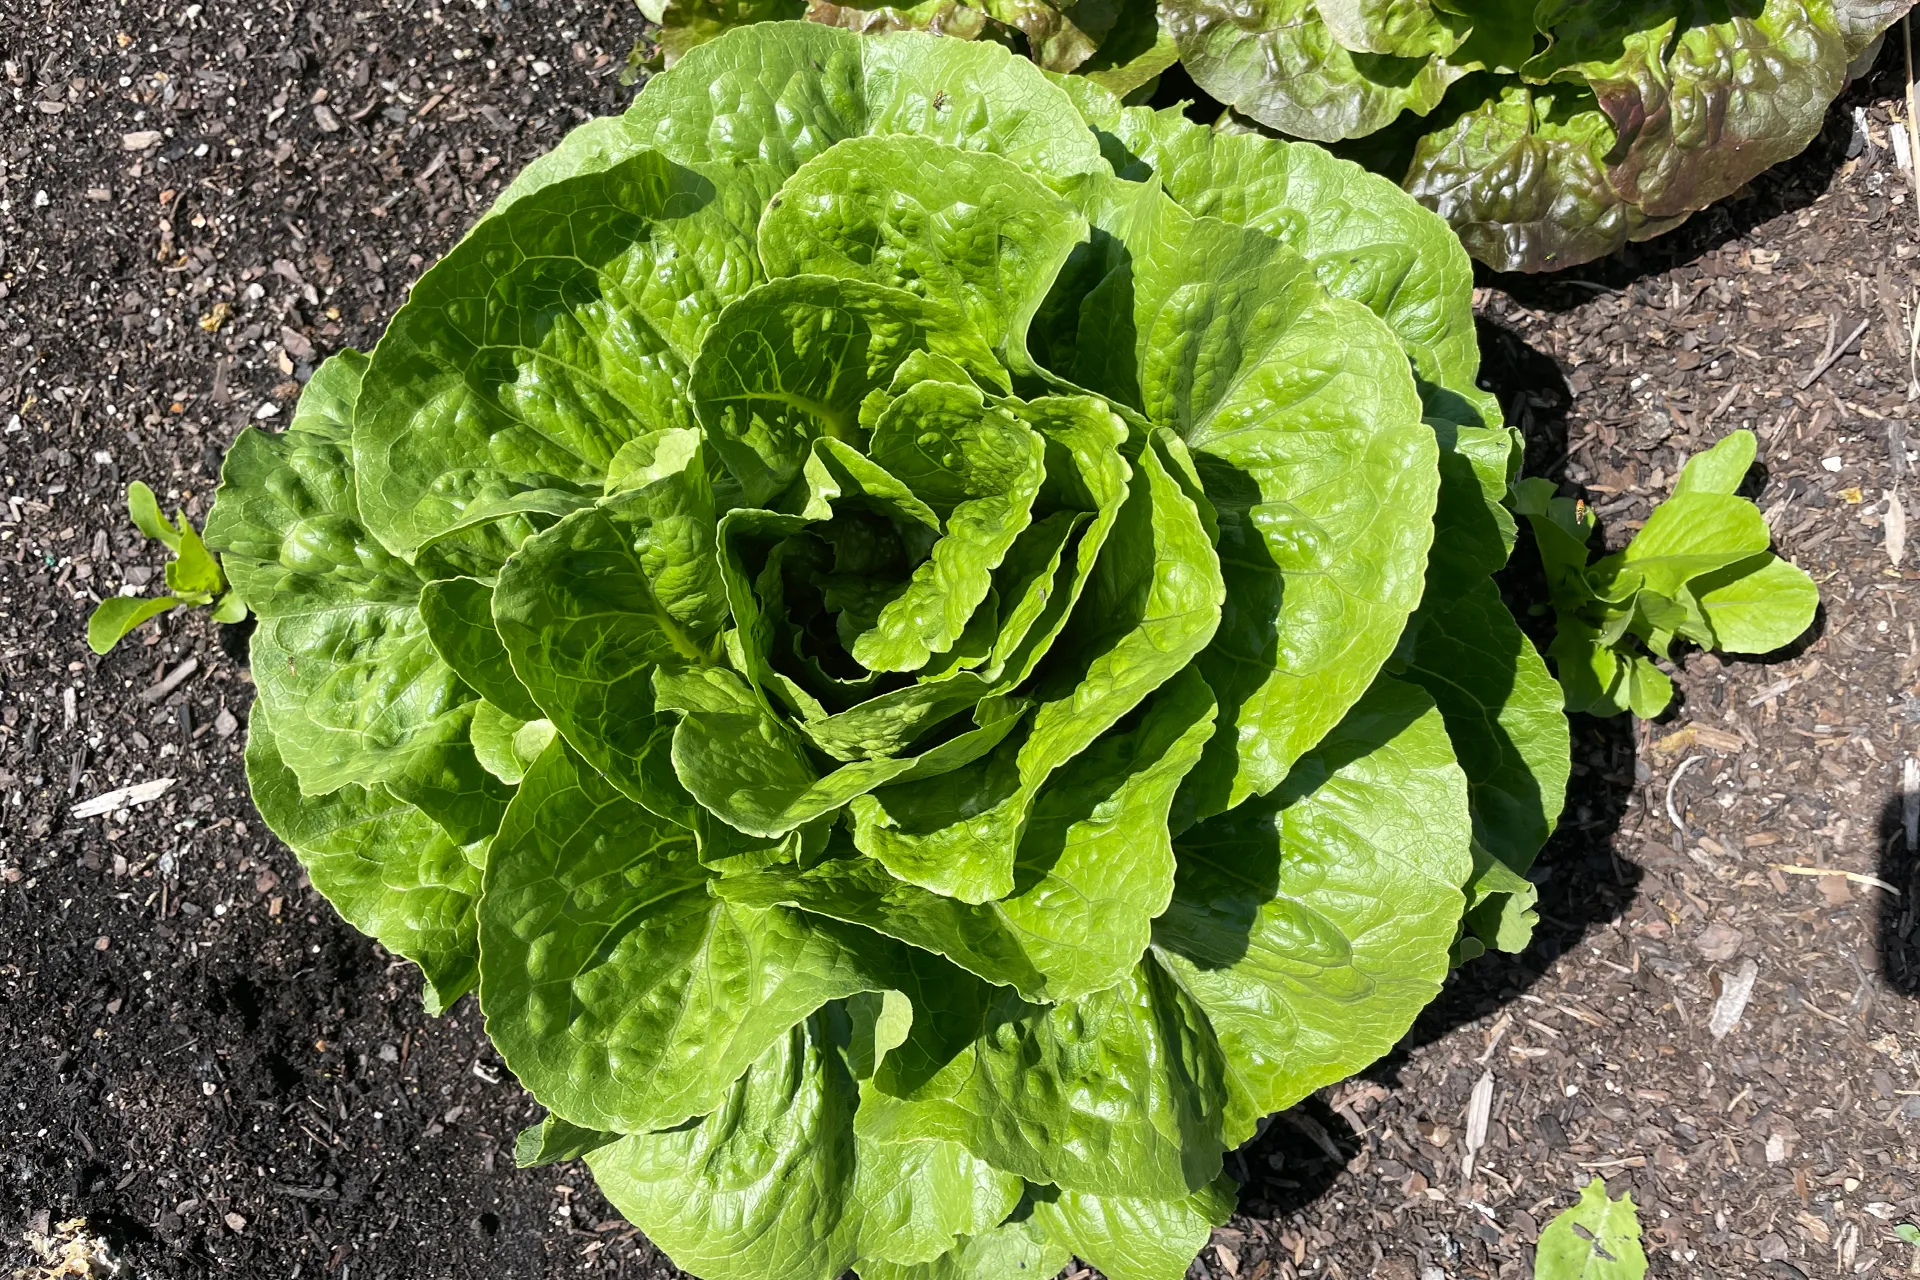 A close-up of a healthy romaine lettuce plant growing in soil. The plant has large, vibrant green leaves that are tightly packed in a rosette formation. The surrounding soil is dark and appears well-tended, with another lettuce plant visible in the background.